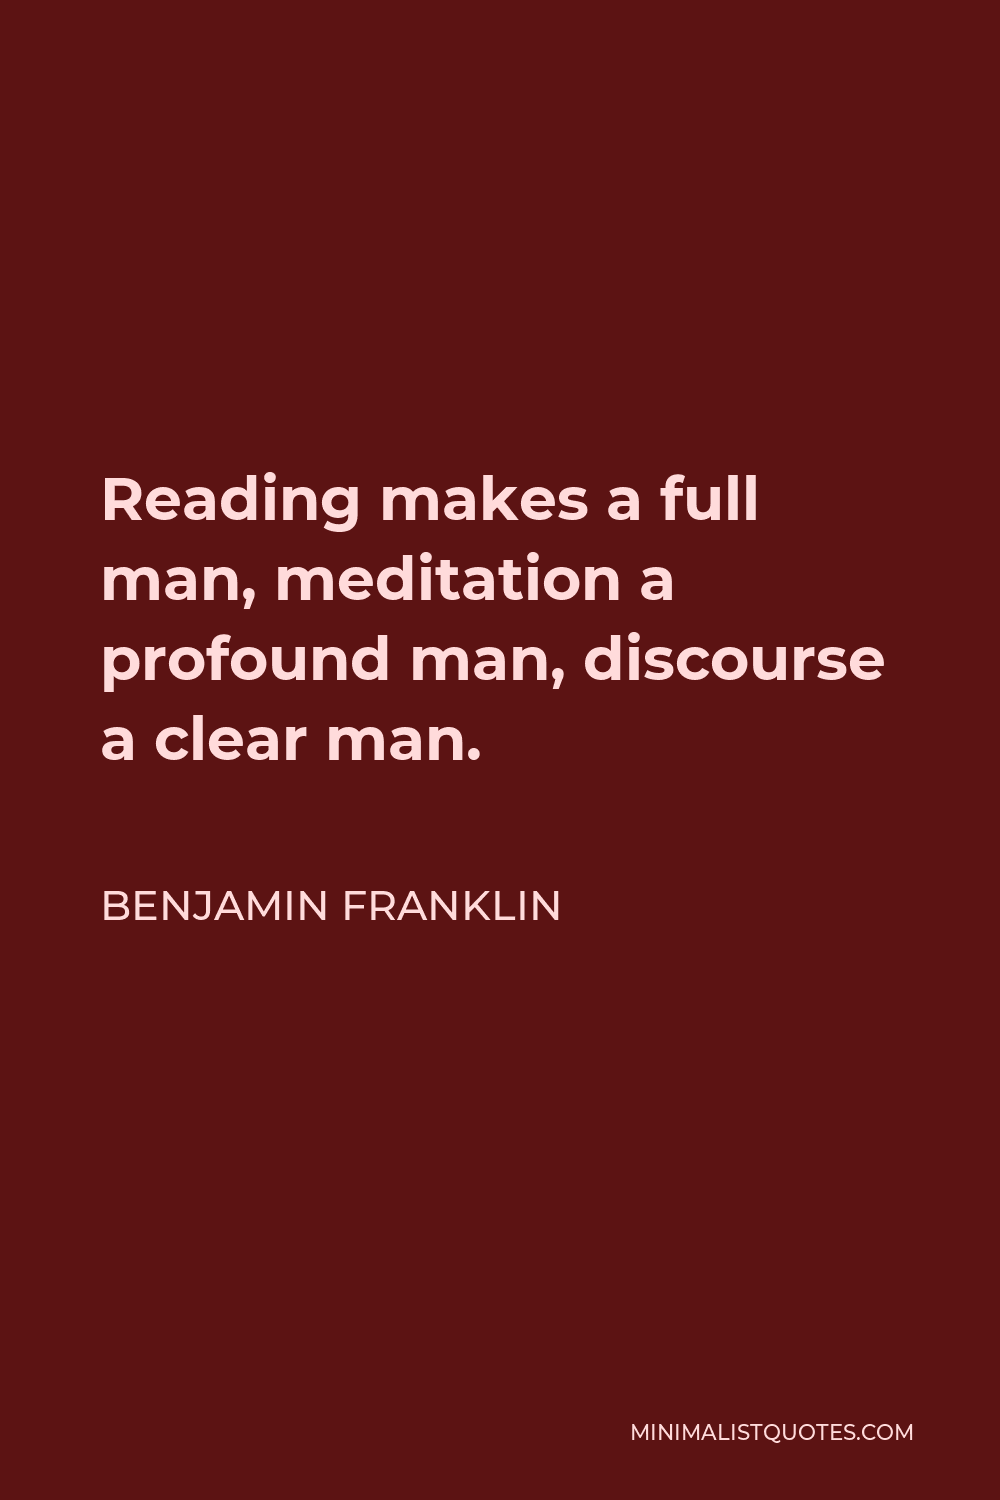 Benjamin Franklin Quote - Reading makes a full man, meditation a profound man, discourse a clear man.